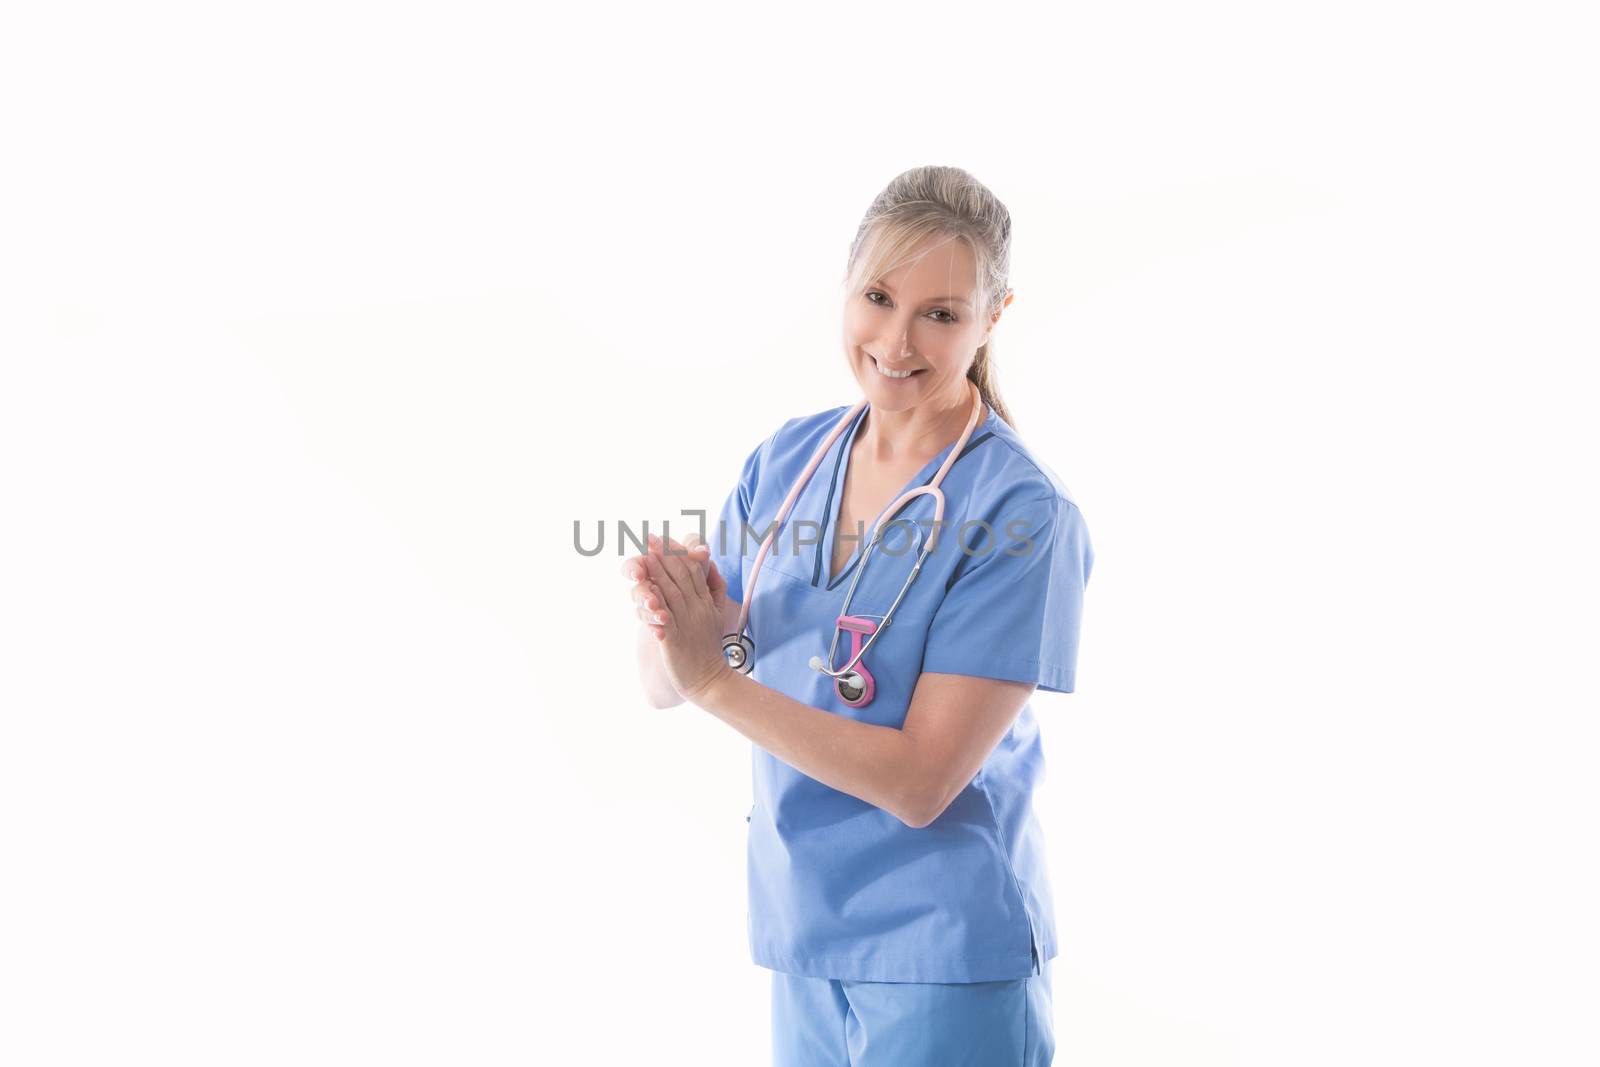 Friendly nurse using an alcohol hand sanitizer by lovleah